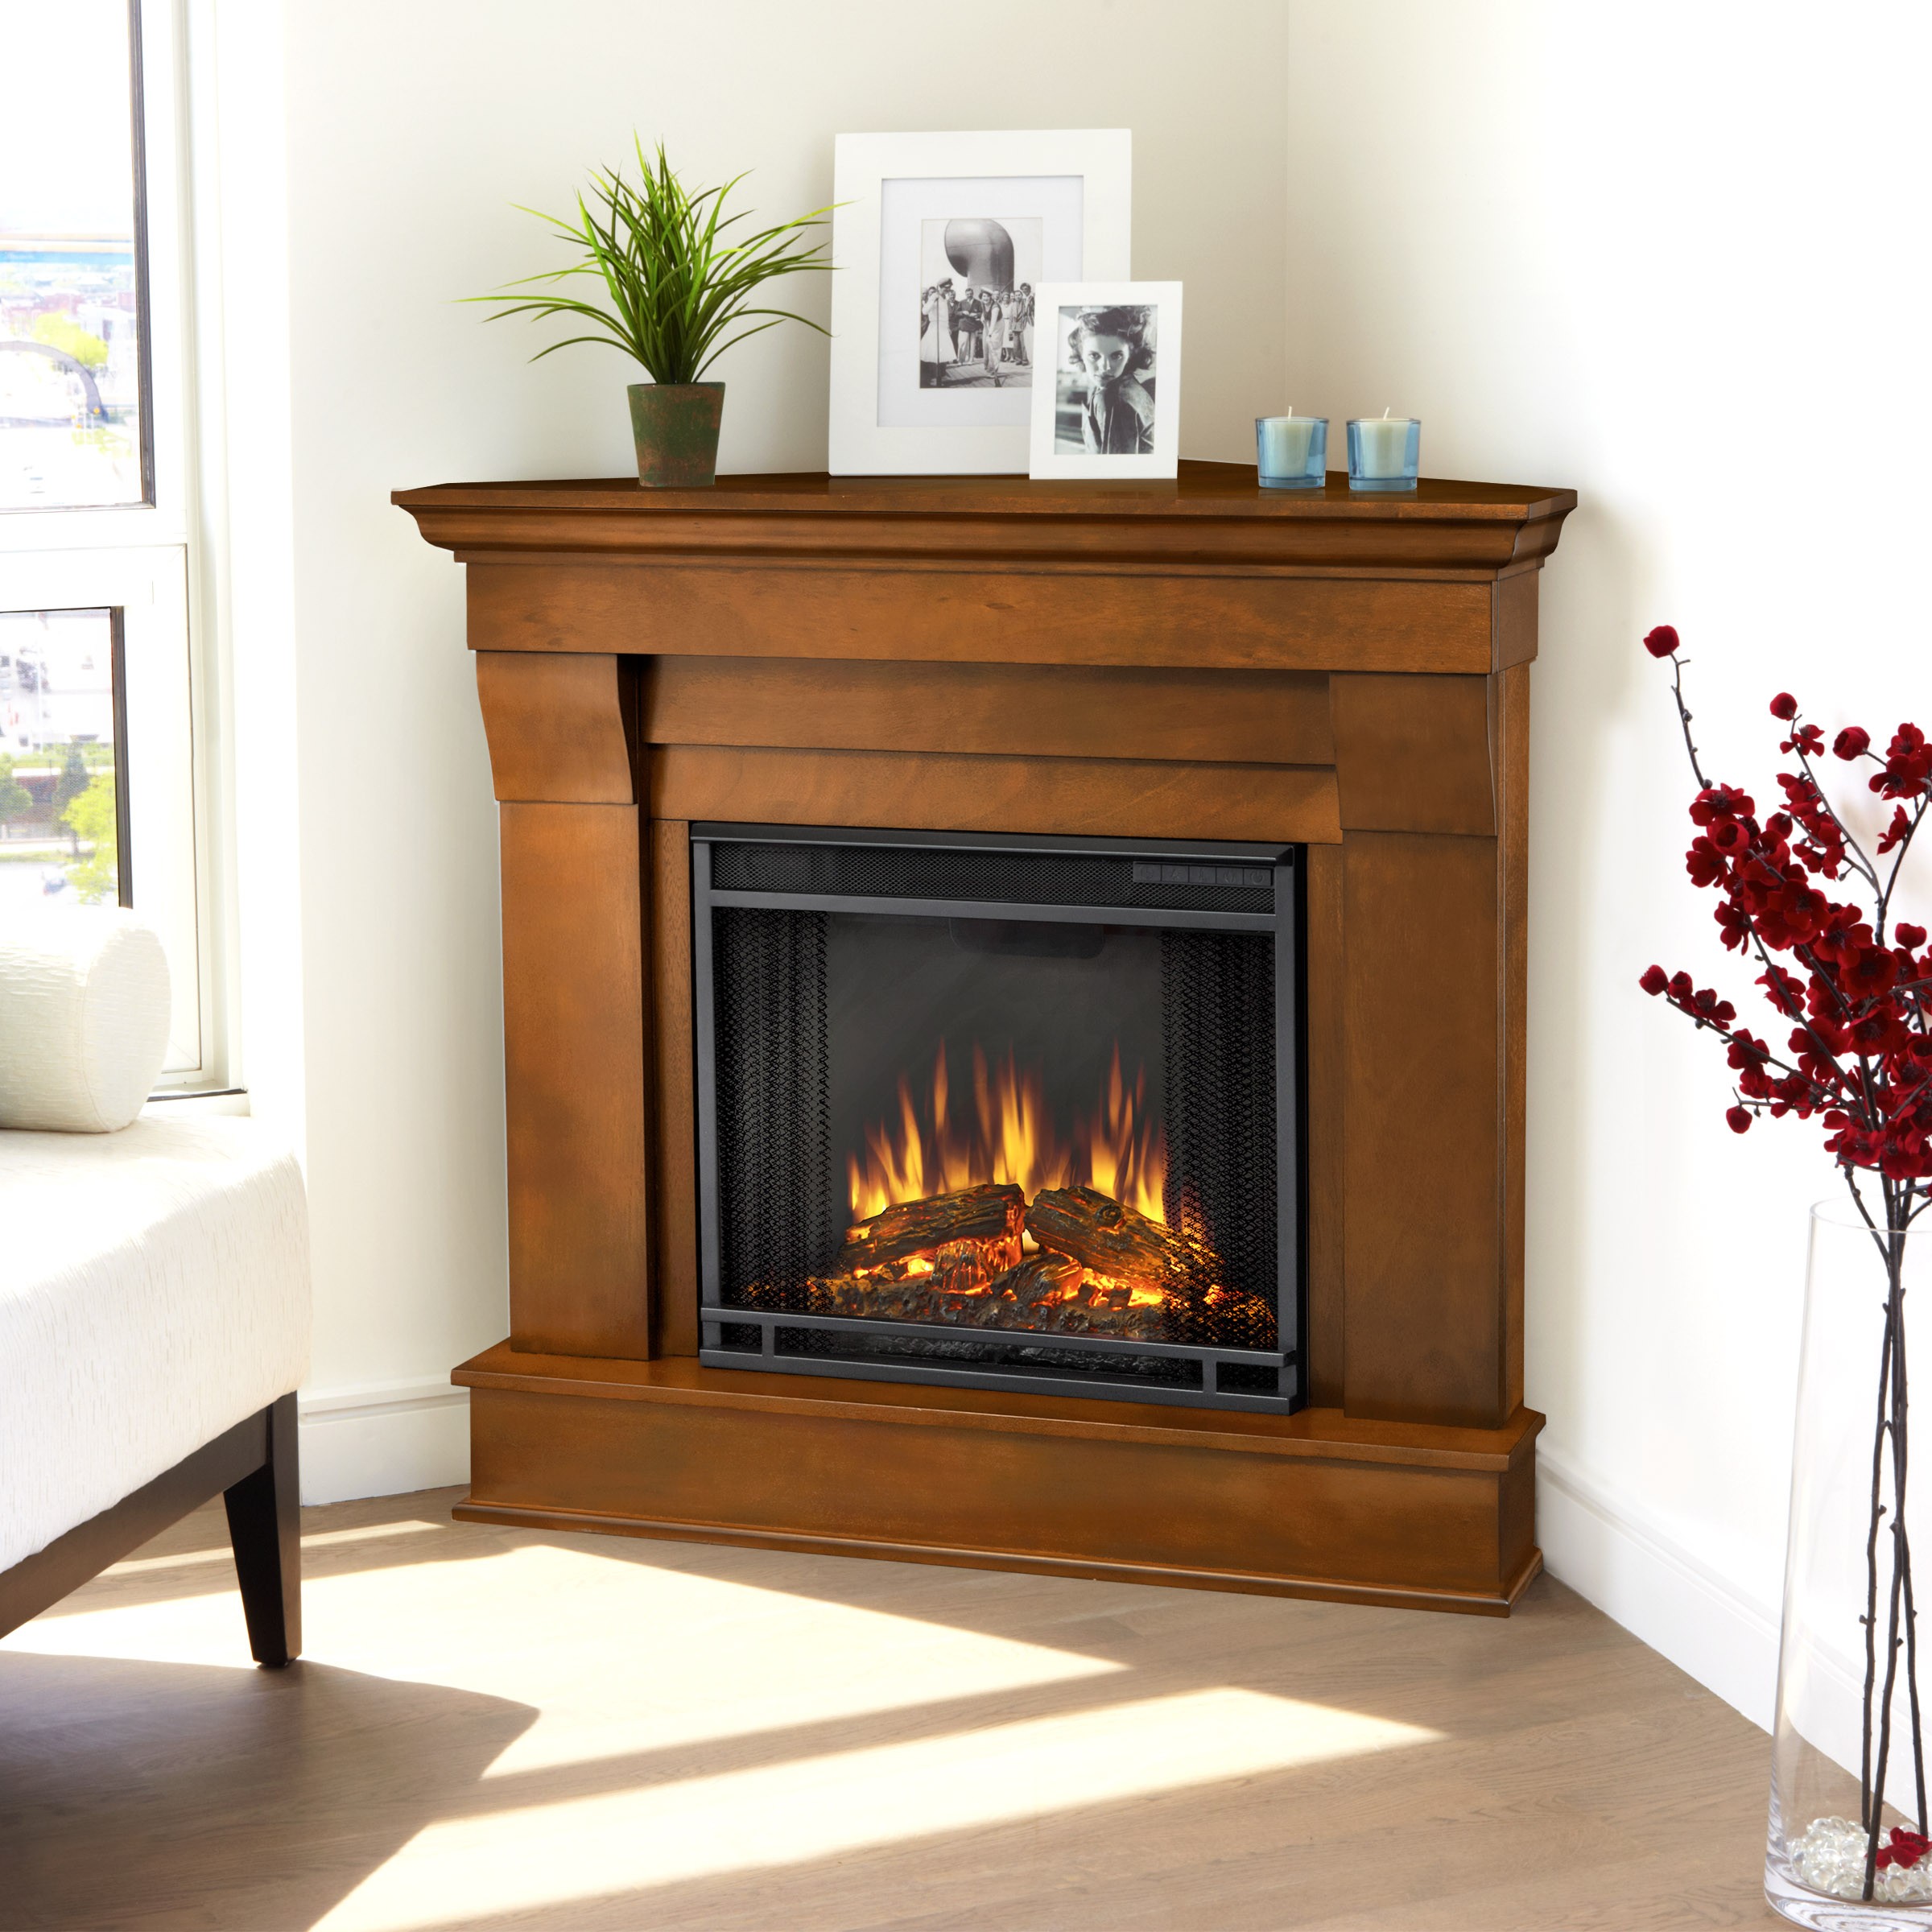 Duluth forge Fireplace Awesome Menards Electric Fireplace Charming Fireplace